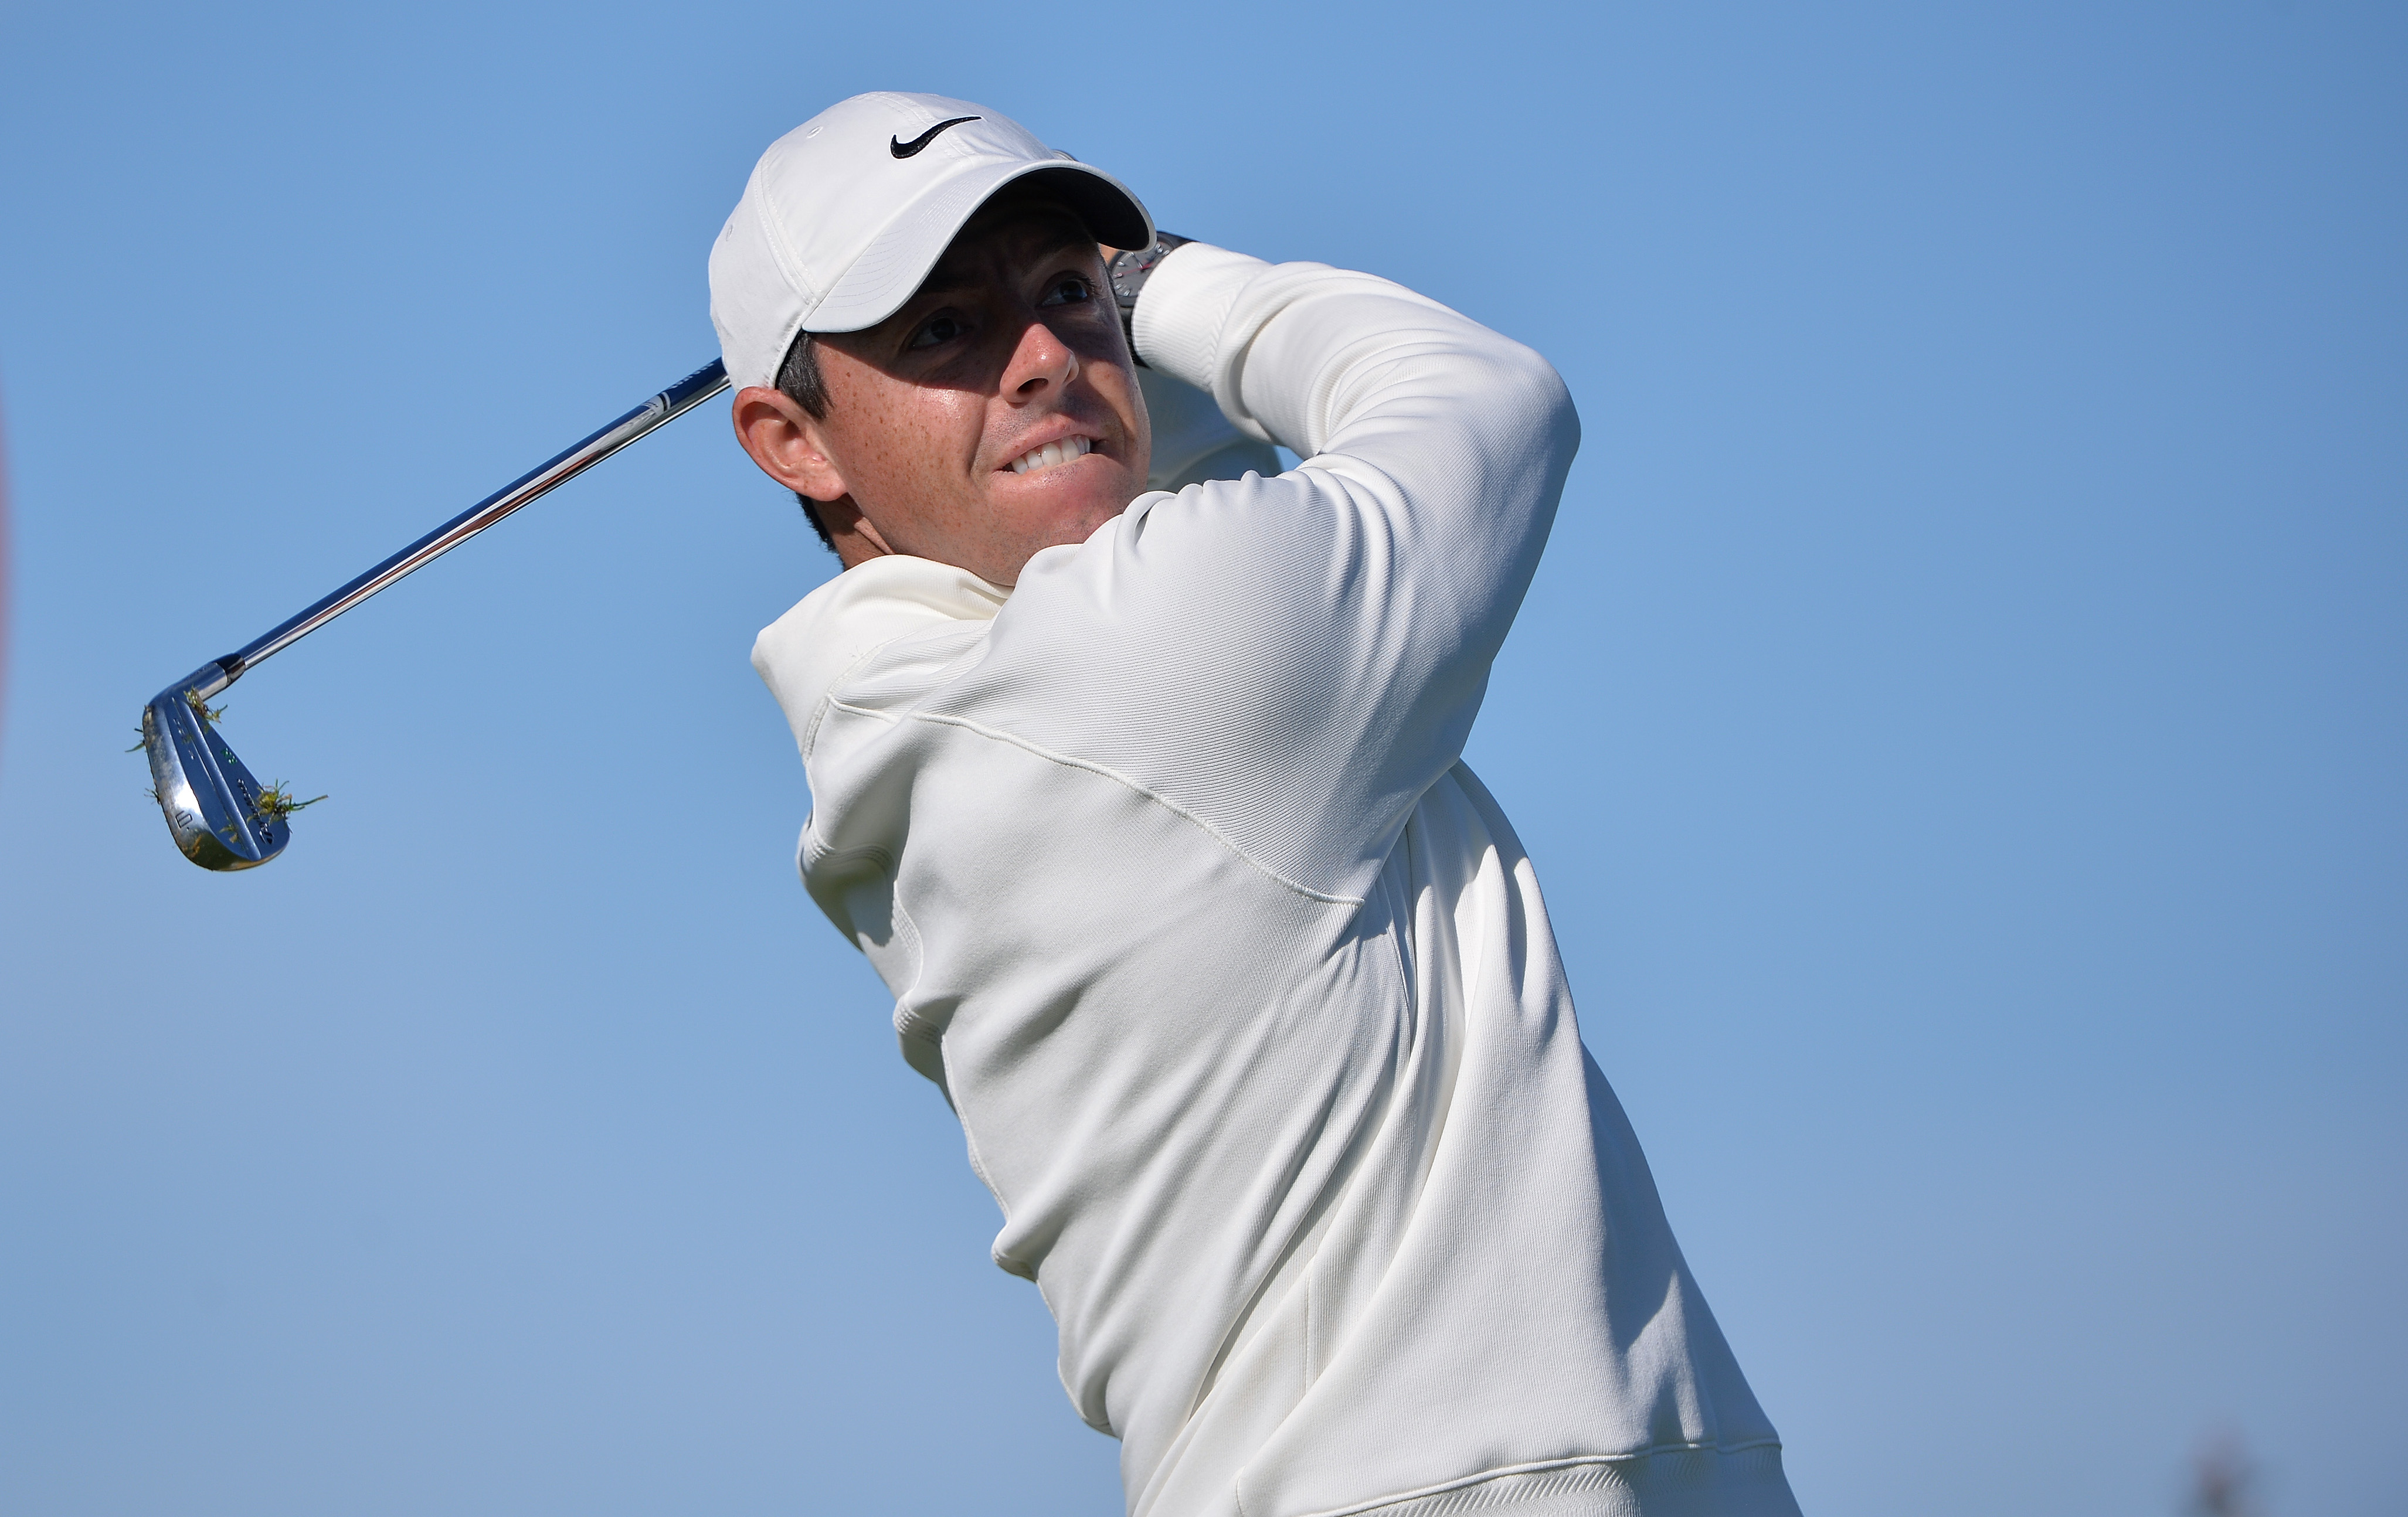 Rory McIlroy to return to World No.1 without even hitting a golf ball